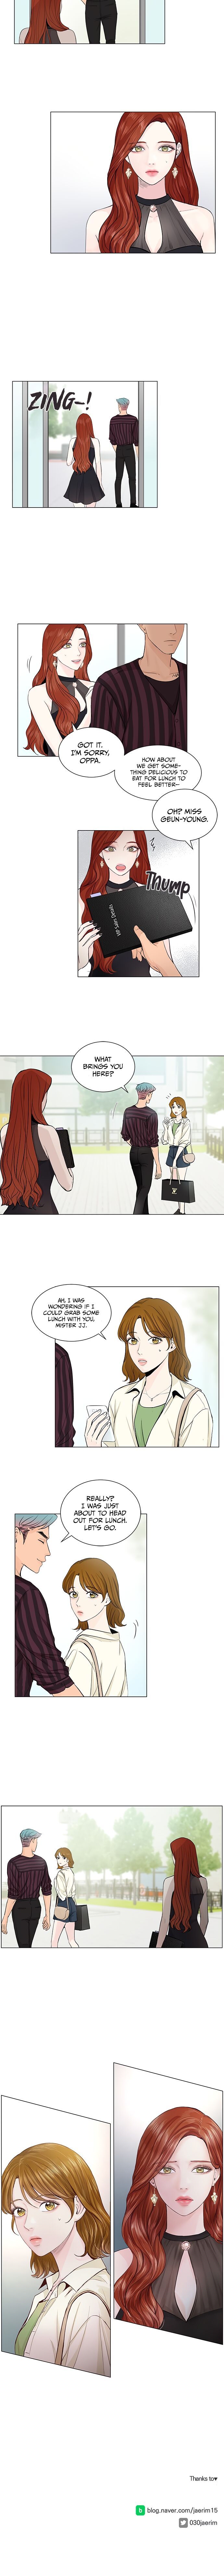 So I Married An Anti-Fan Chapter 042 page 6